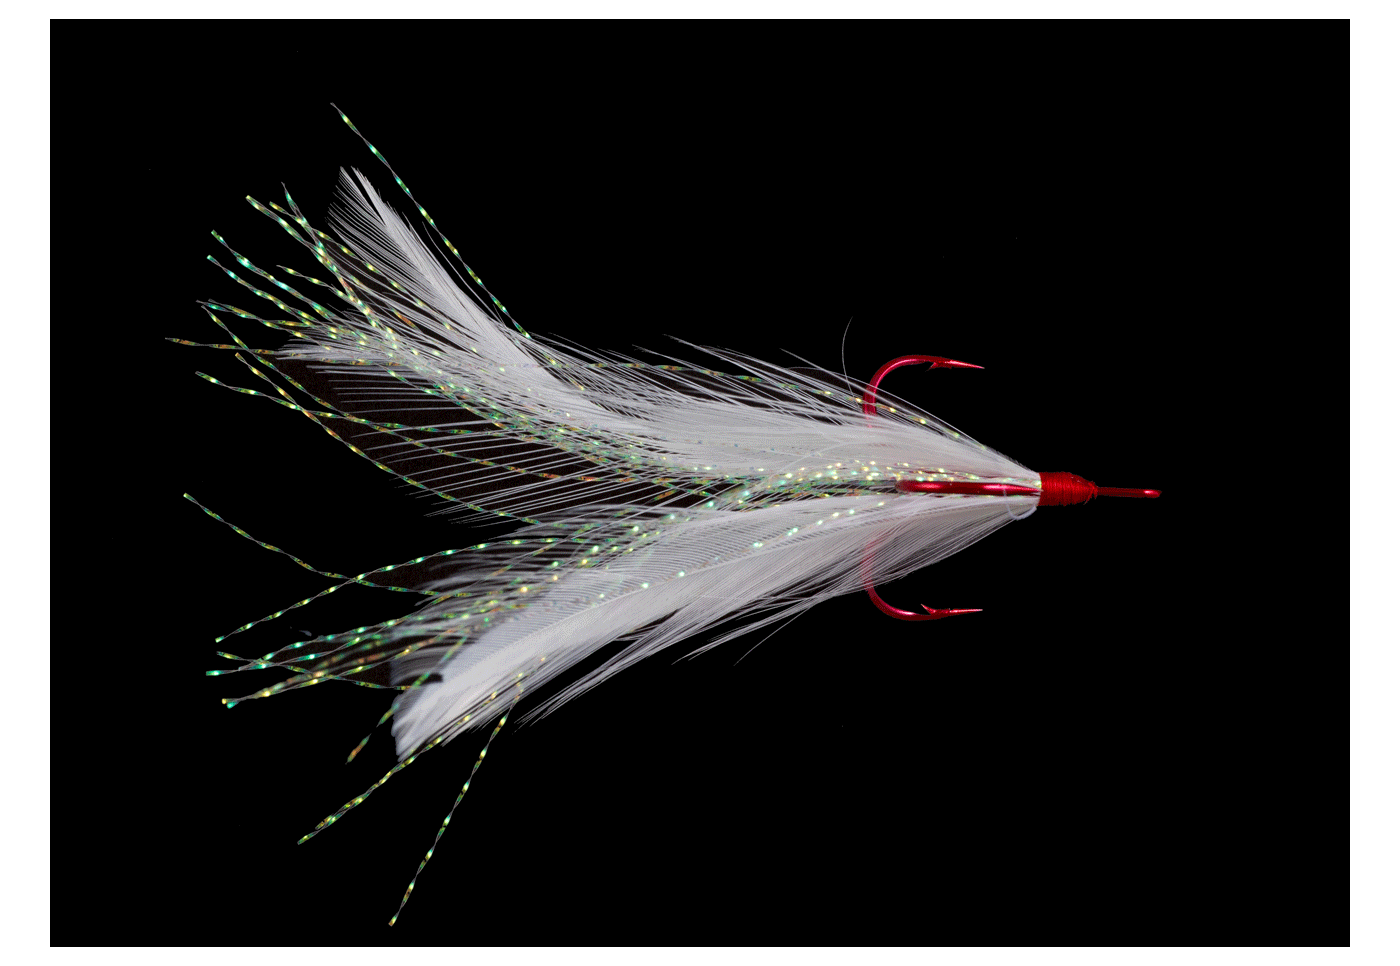 Dressed Treble - Red Hook/Red Grizzly Feathers 4, Hooks -  Canada